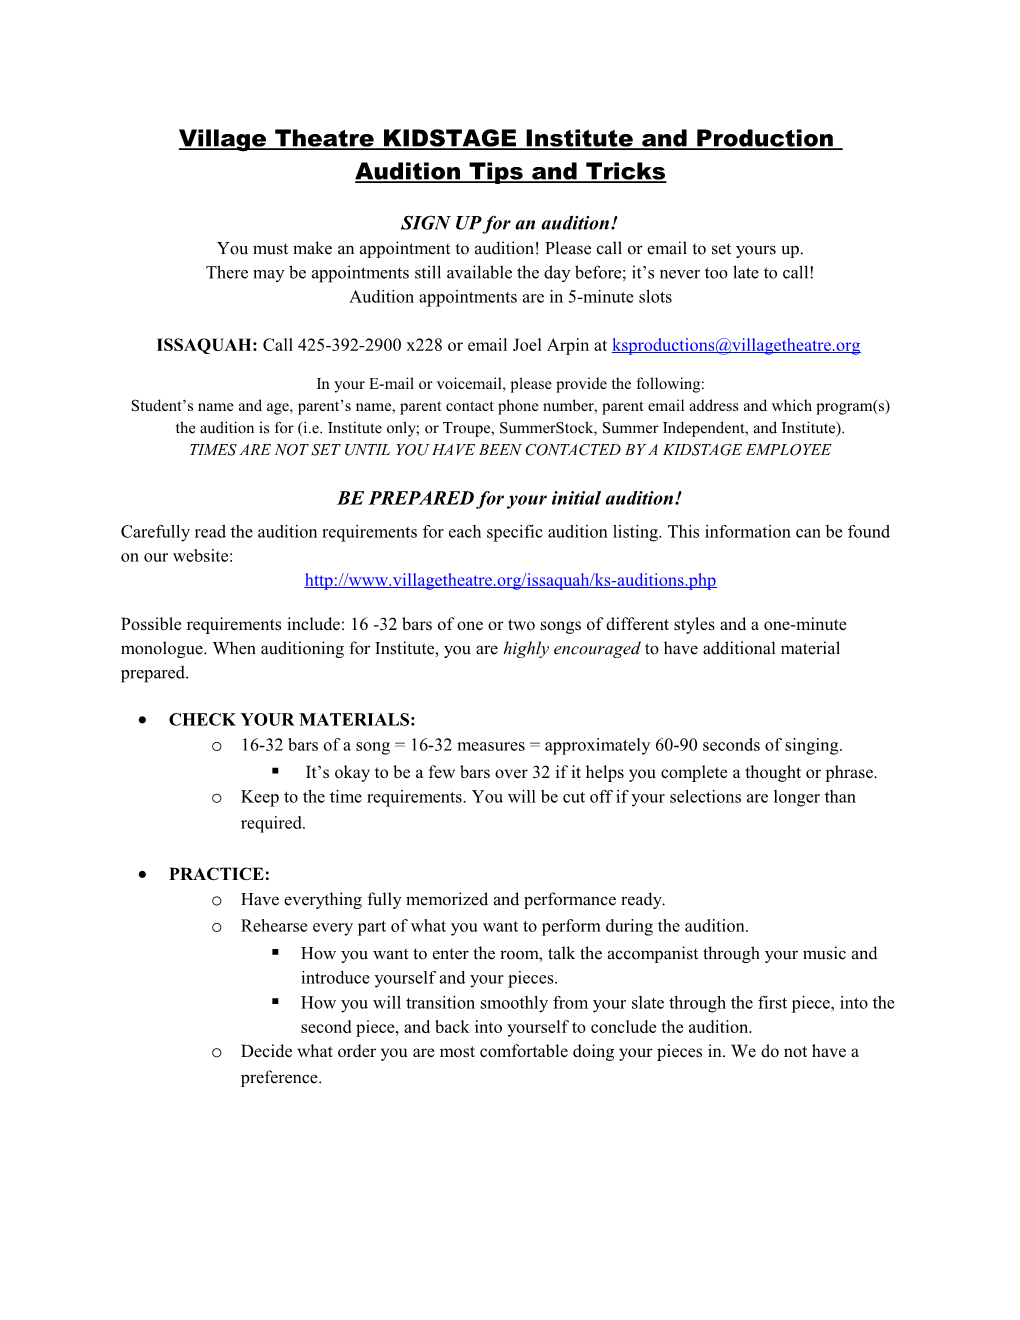 Village Theatre Institute and KIDSTAGE Summer Audition Information and Tips